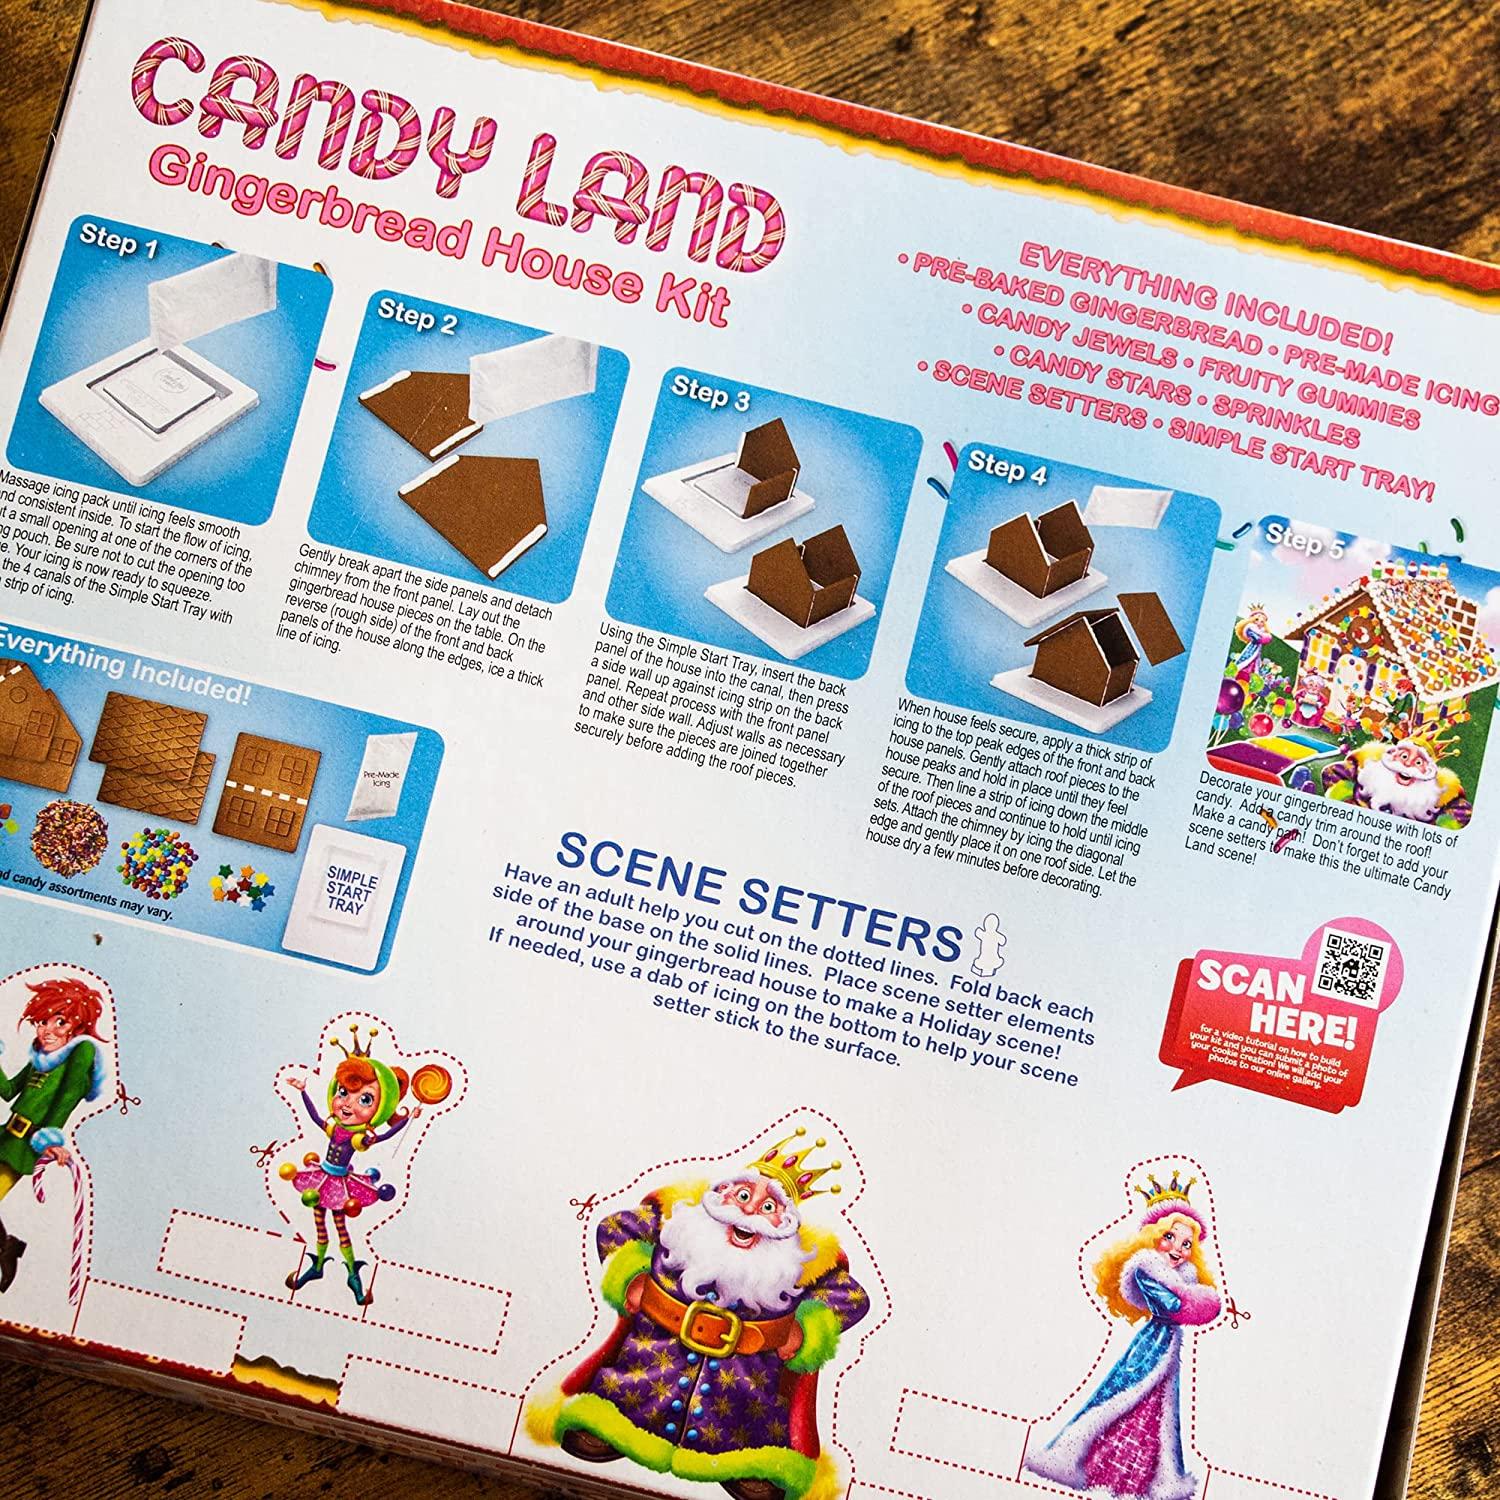 Hasbro Candy Land Gingerbread House Kit Review